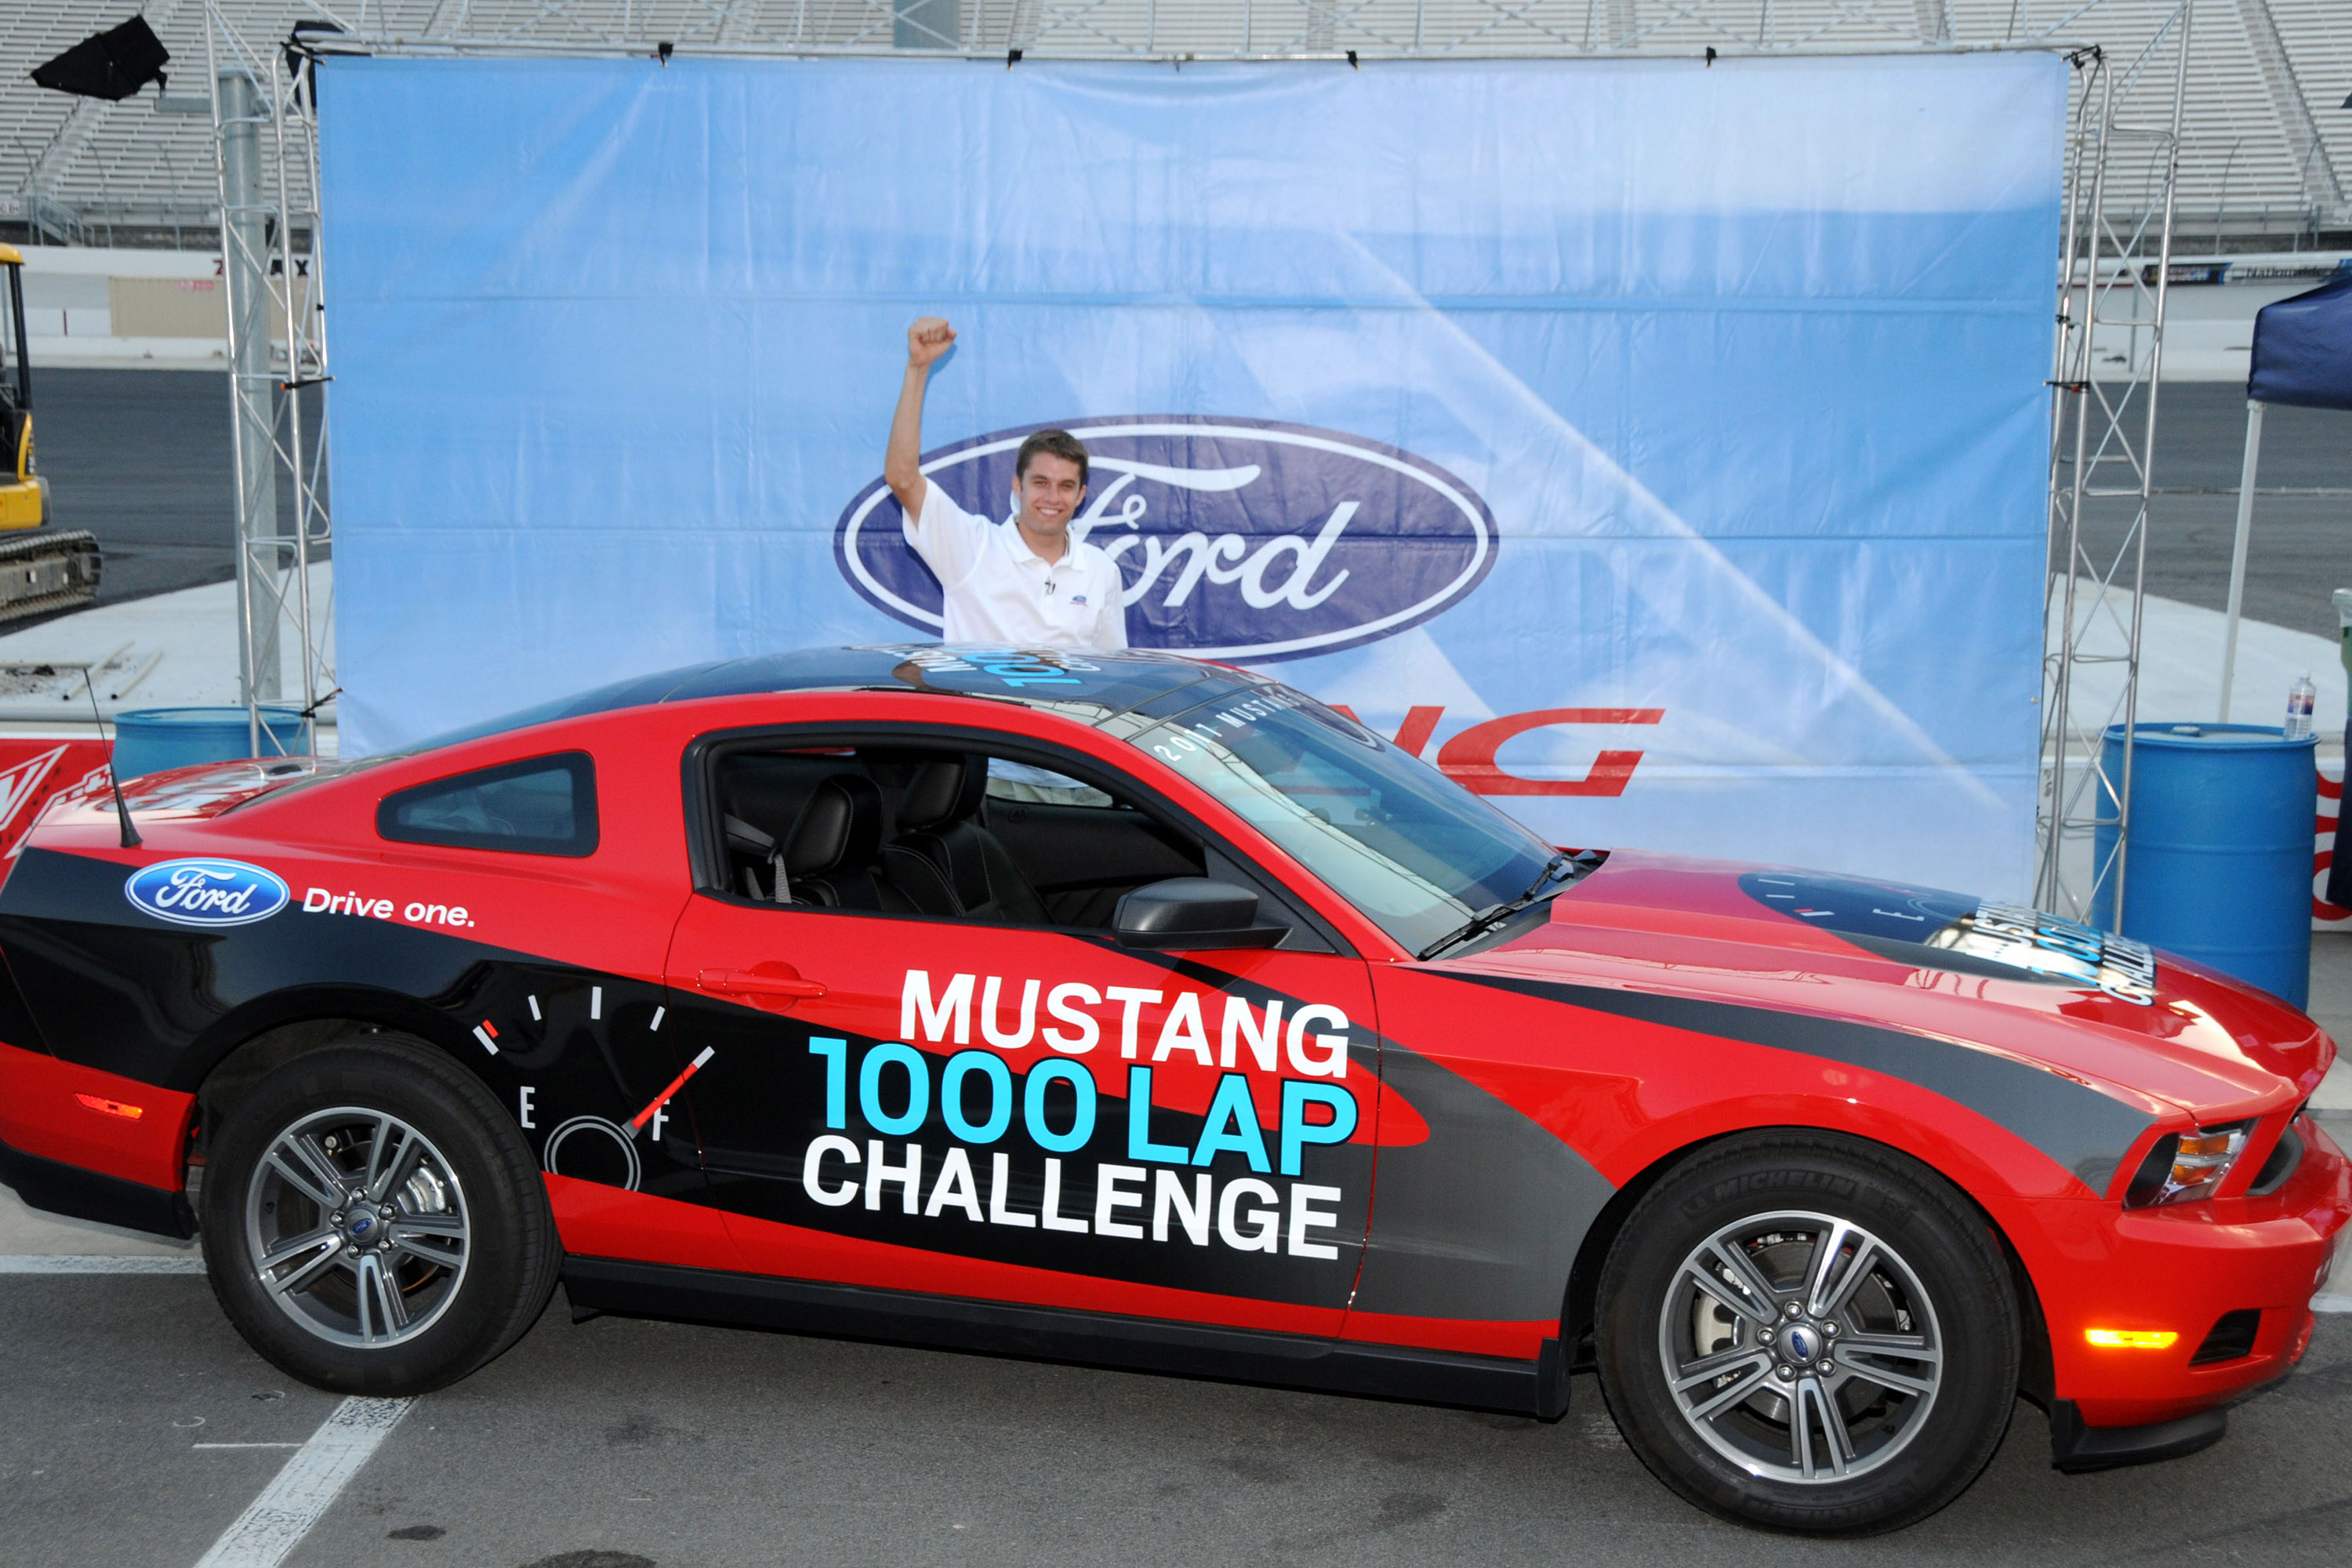 Ford Mustang 1000 Lap Challenge